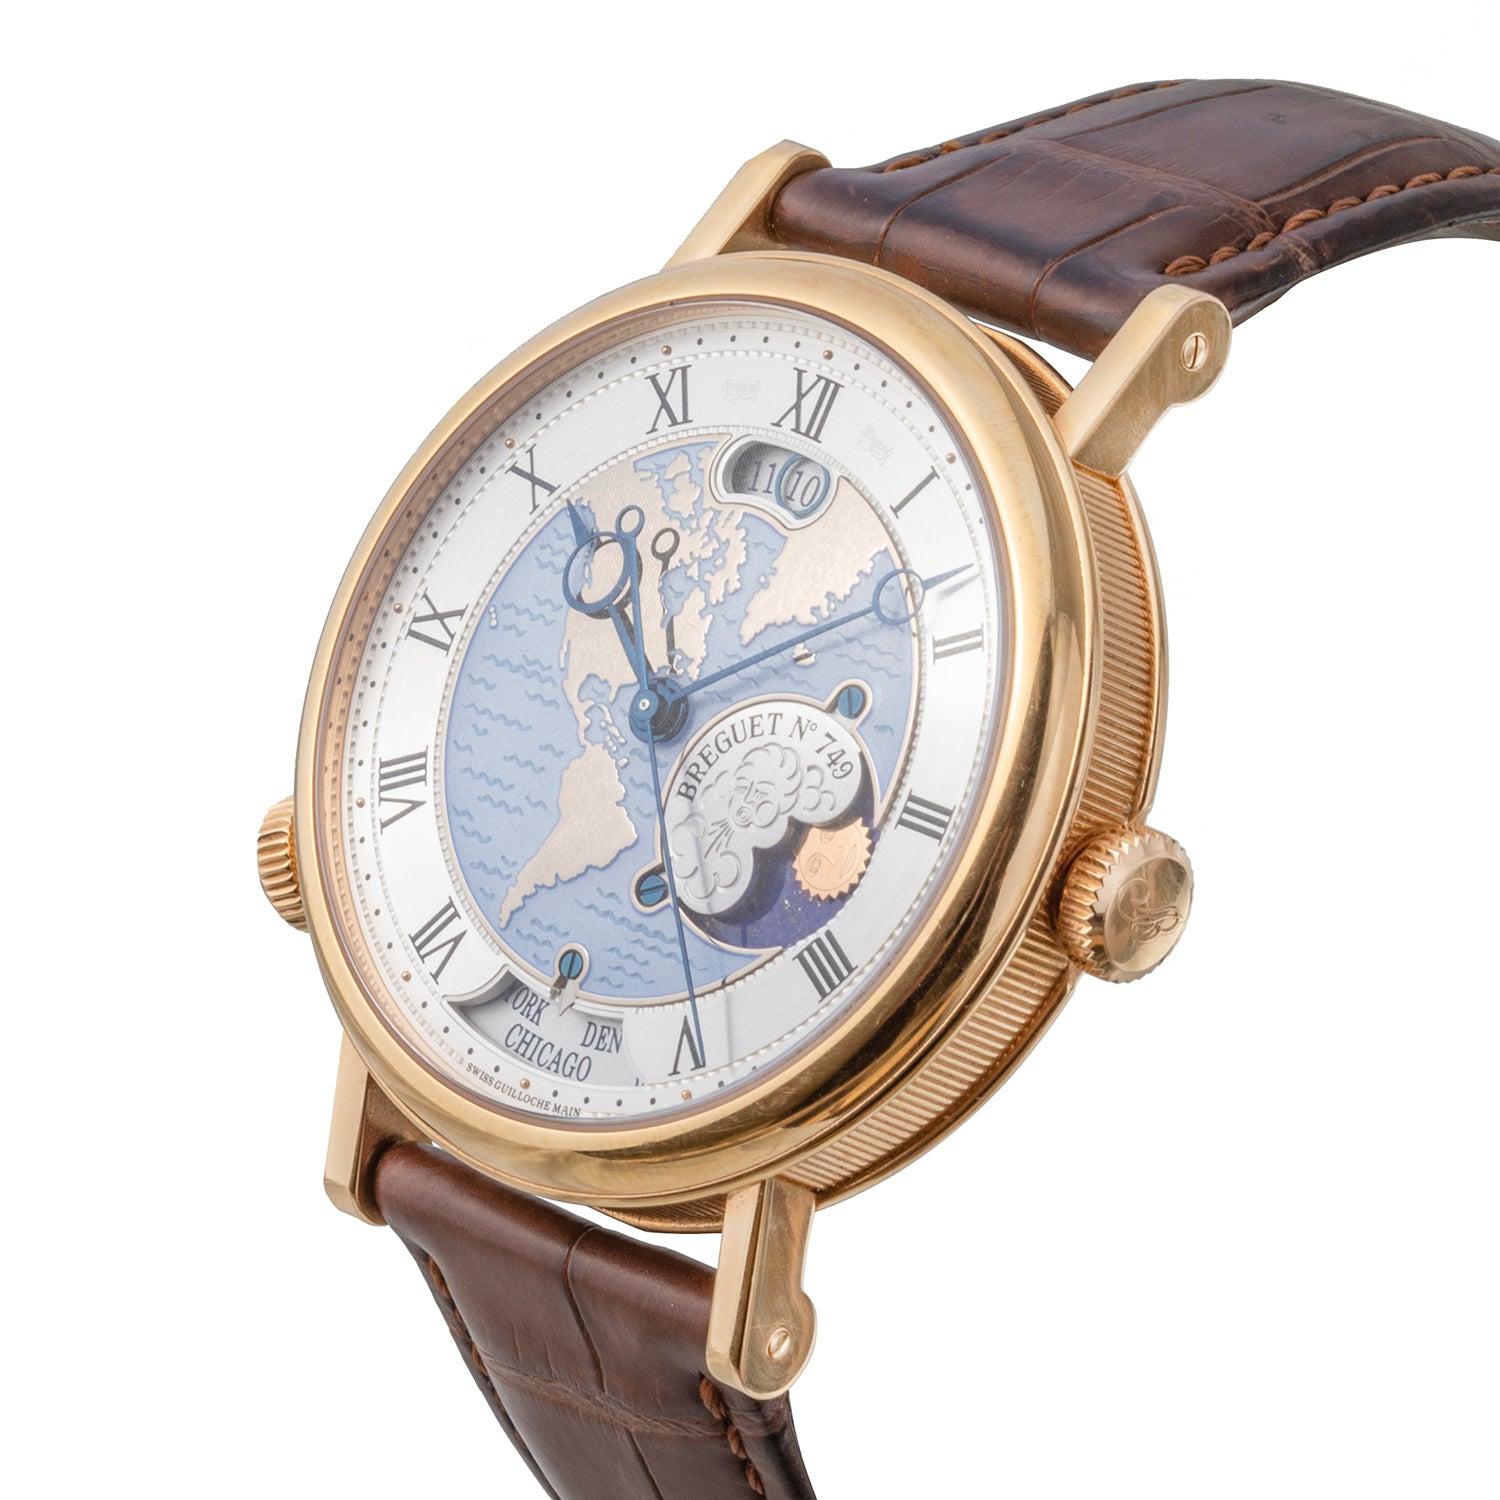 Pre-owned Breguet Classique Hora Mundi wristwatch (ref. 5717BR/EU/9ZU), featuring a self-winding automatic movement; gold dial depicting the American continent, hand-engraved on a rose engine with a light blue 'wave' motif at center coated with